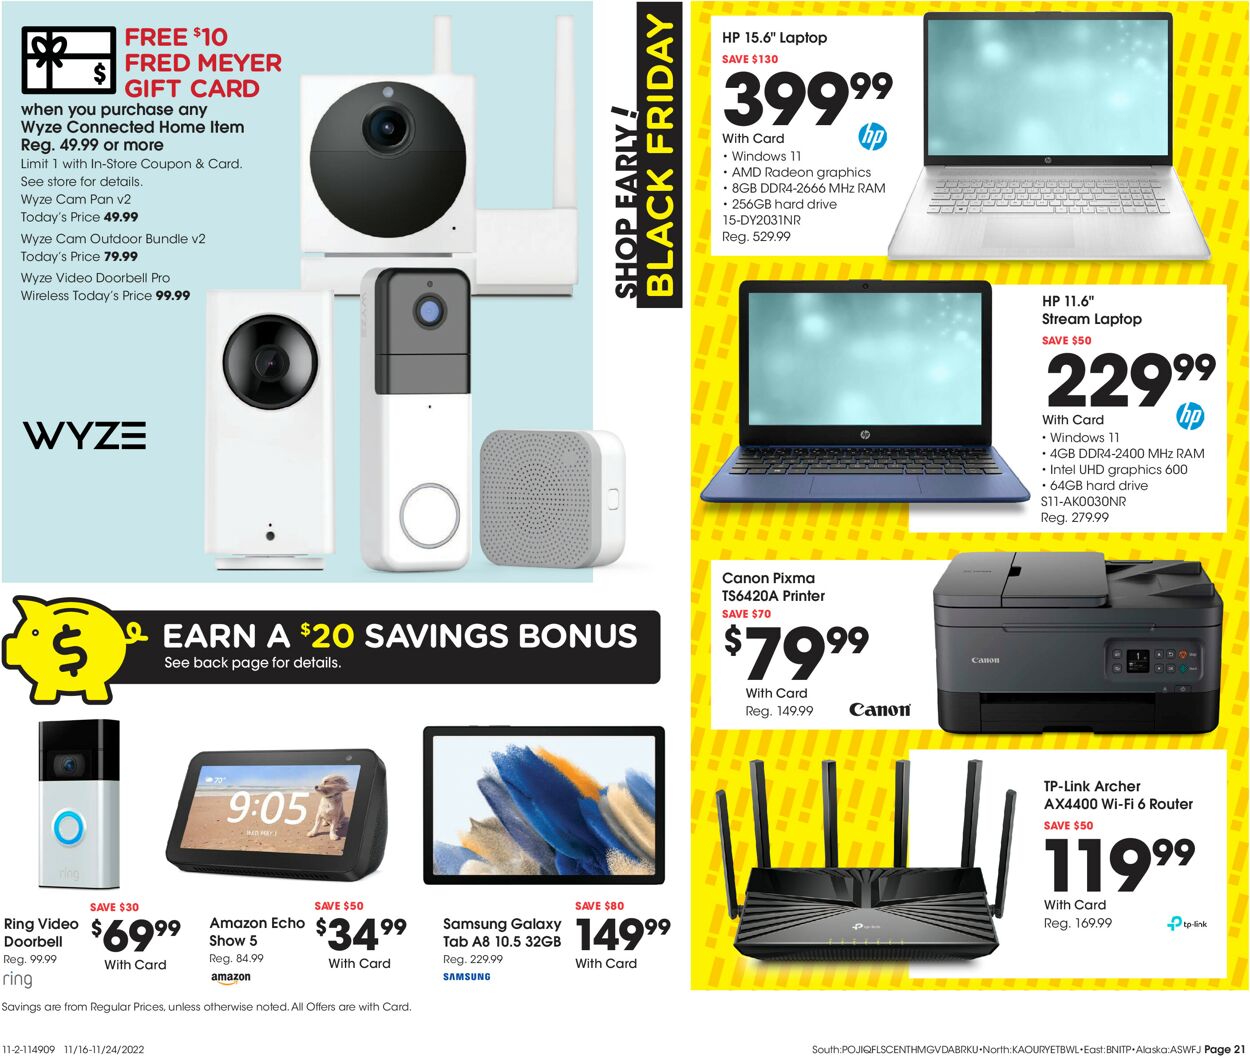 Fred Meyer Weekly Ad Circular - valid 11/16-11/24/2022 (Page 21)